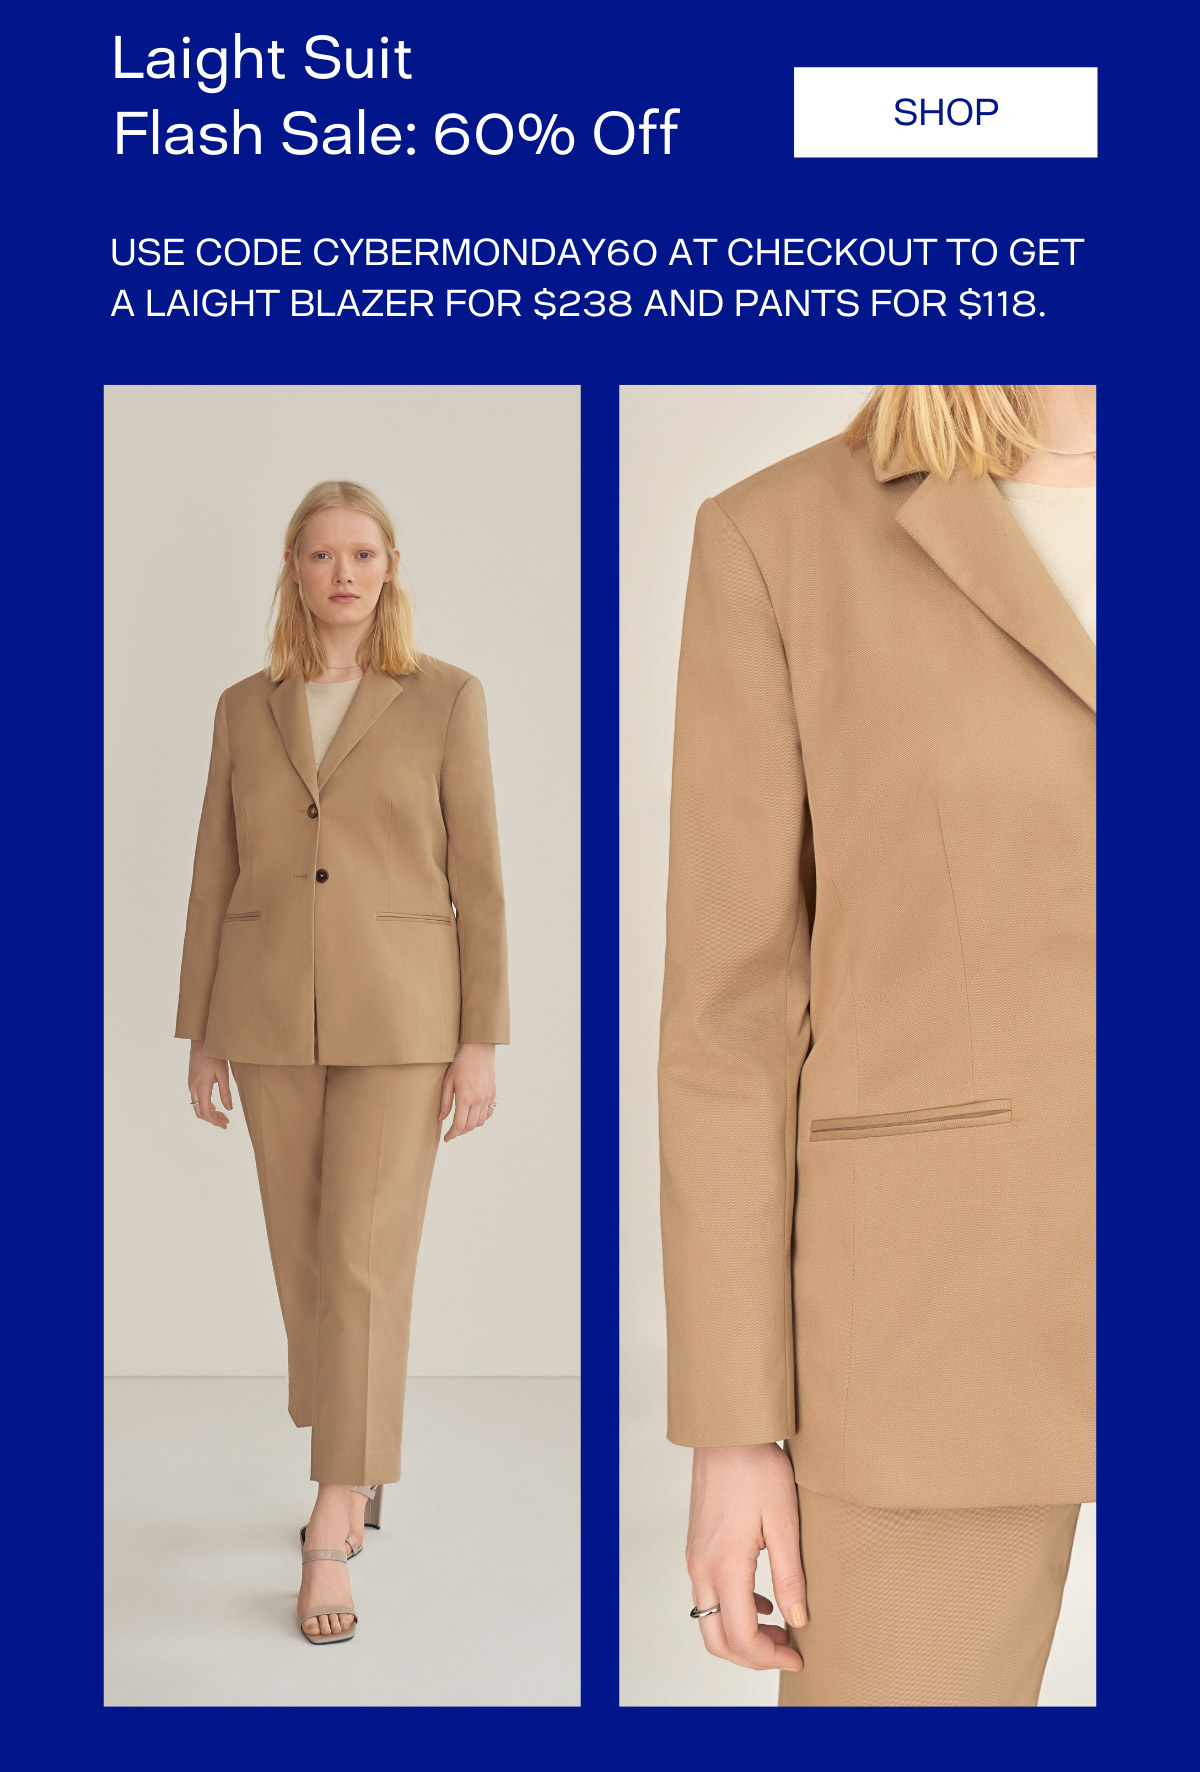 Henning Cyber Monday Laight Suit